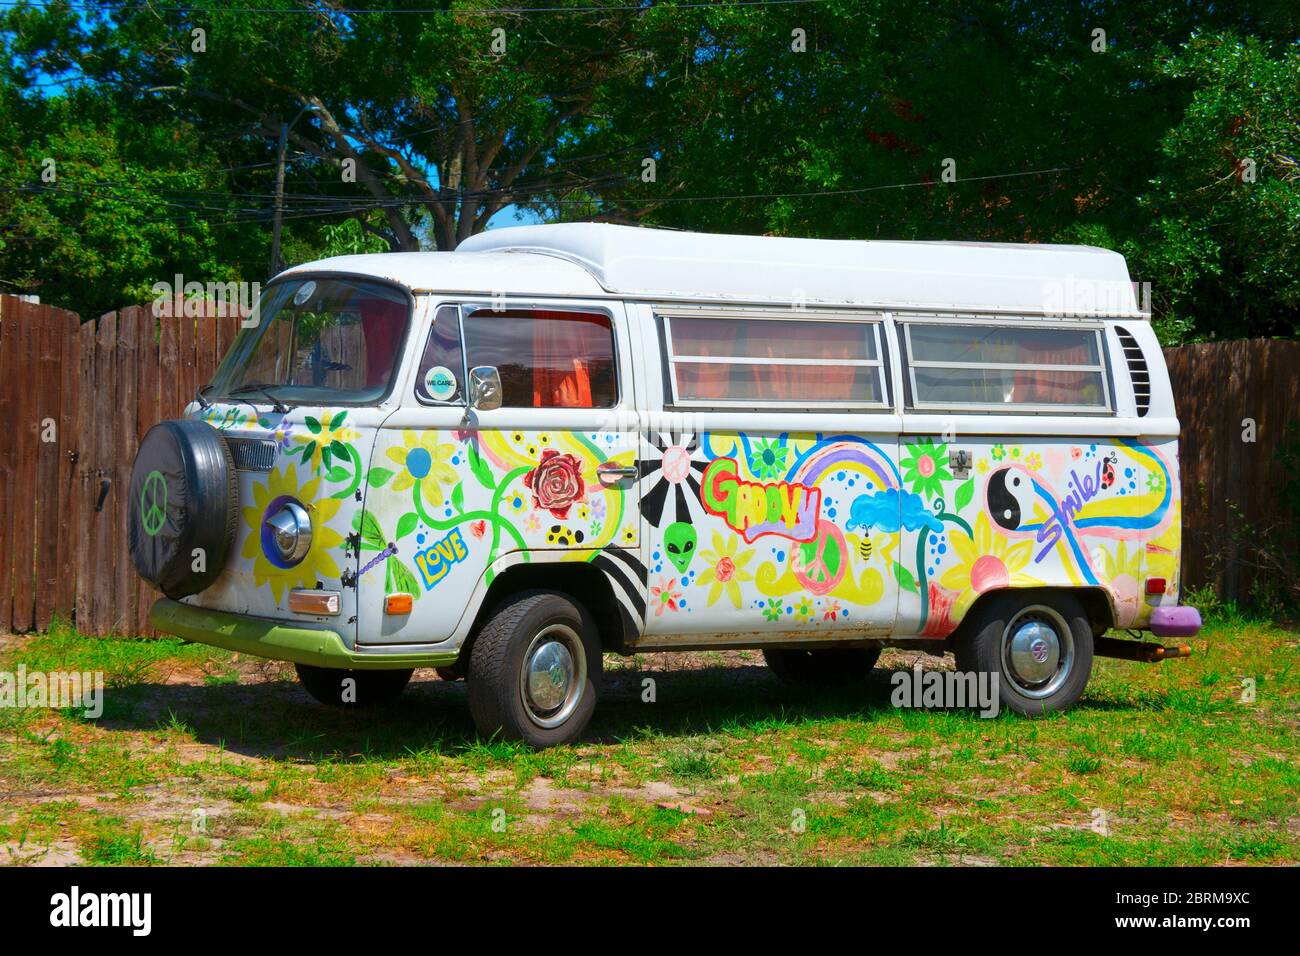 patrice Lover og forskrifter Etablering Saint Petersburg, Florida / USA - May 3, 2020: Antique hippie 1970  Volkswagen VW Type 2 camper van with love and groovy colorful artwork hand  painted Stock Photo - Alamy